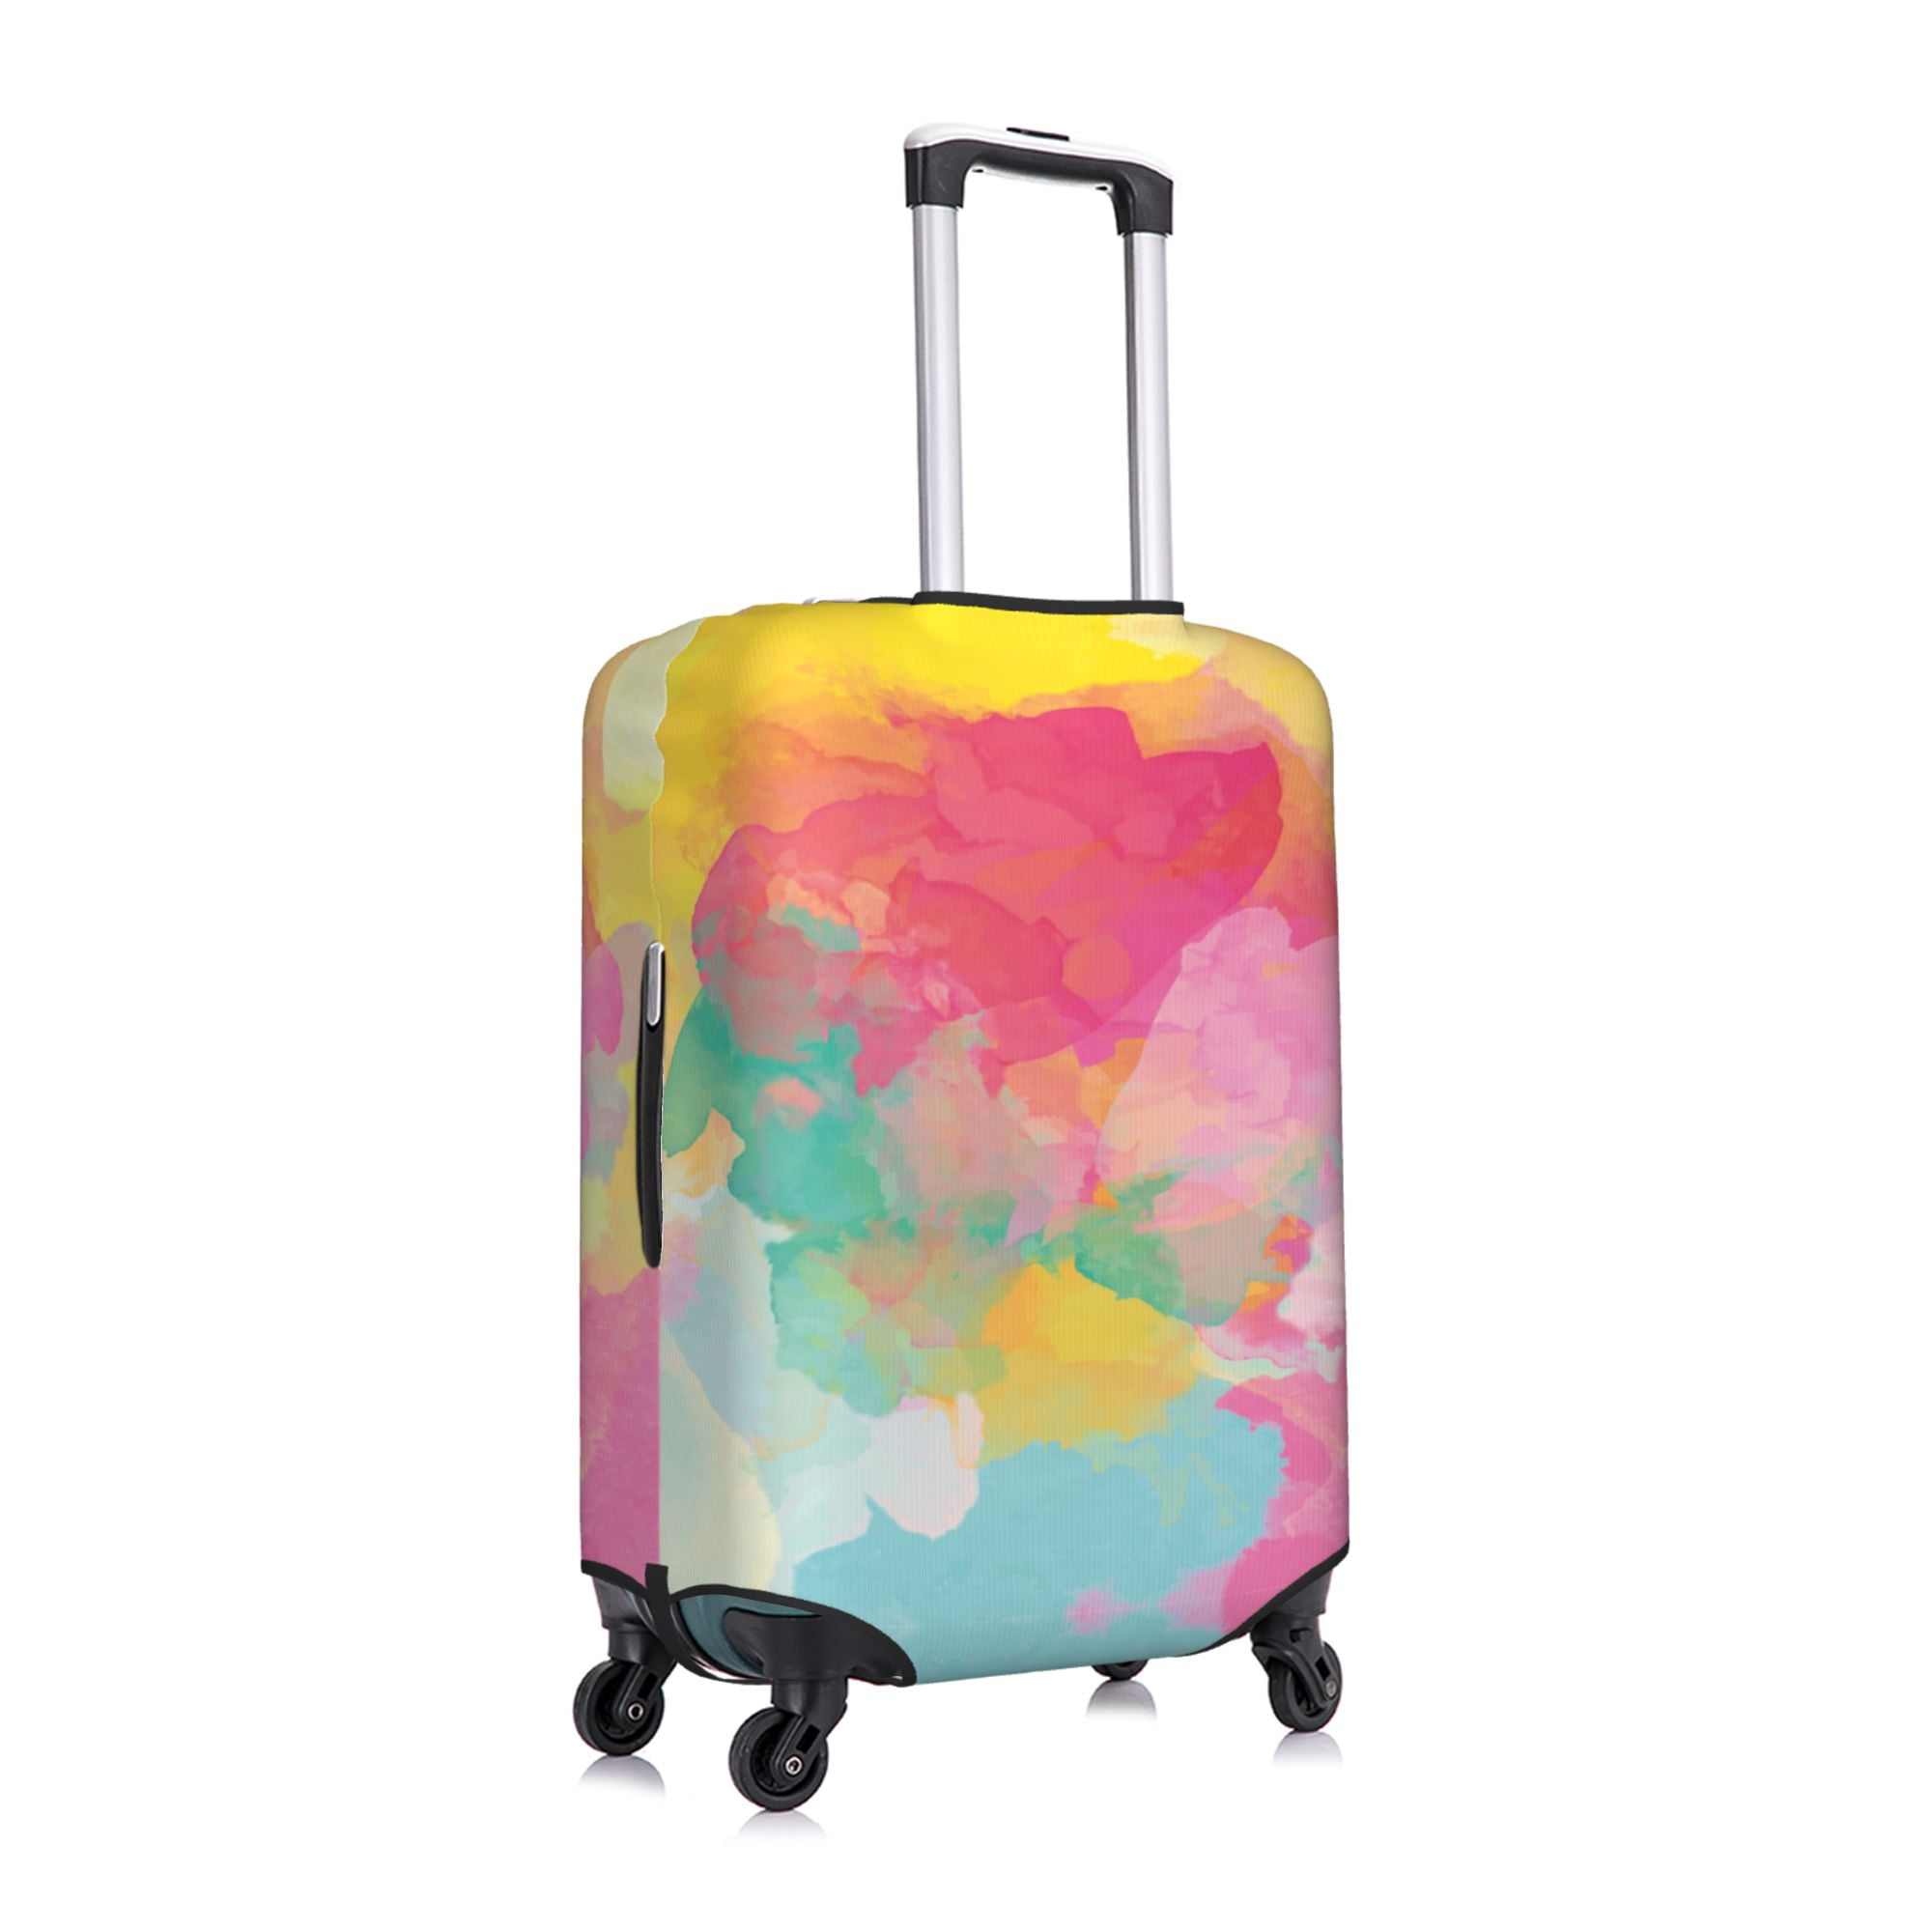 Luggage Cover Travel Suitcase Cover Protector,Navy Gradient Oil Painting  Luggage Covers for Suitcase Fits 22-25 Inch Luggage,Watercolor Abstract  Color